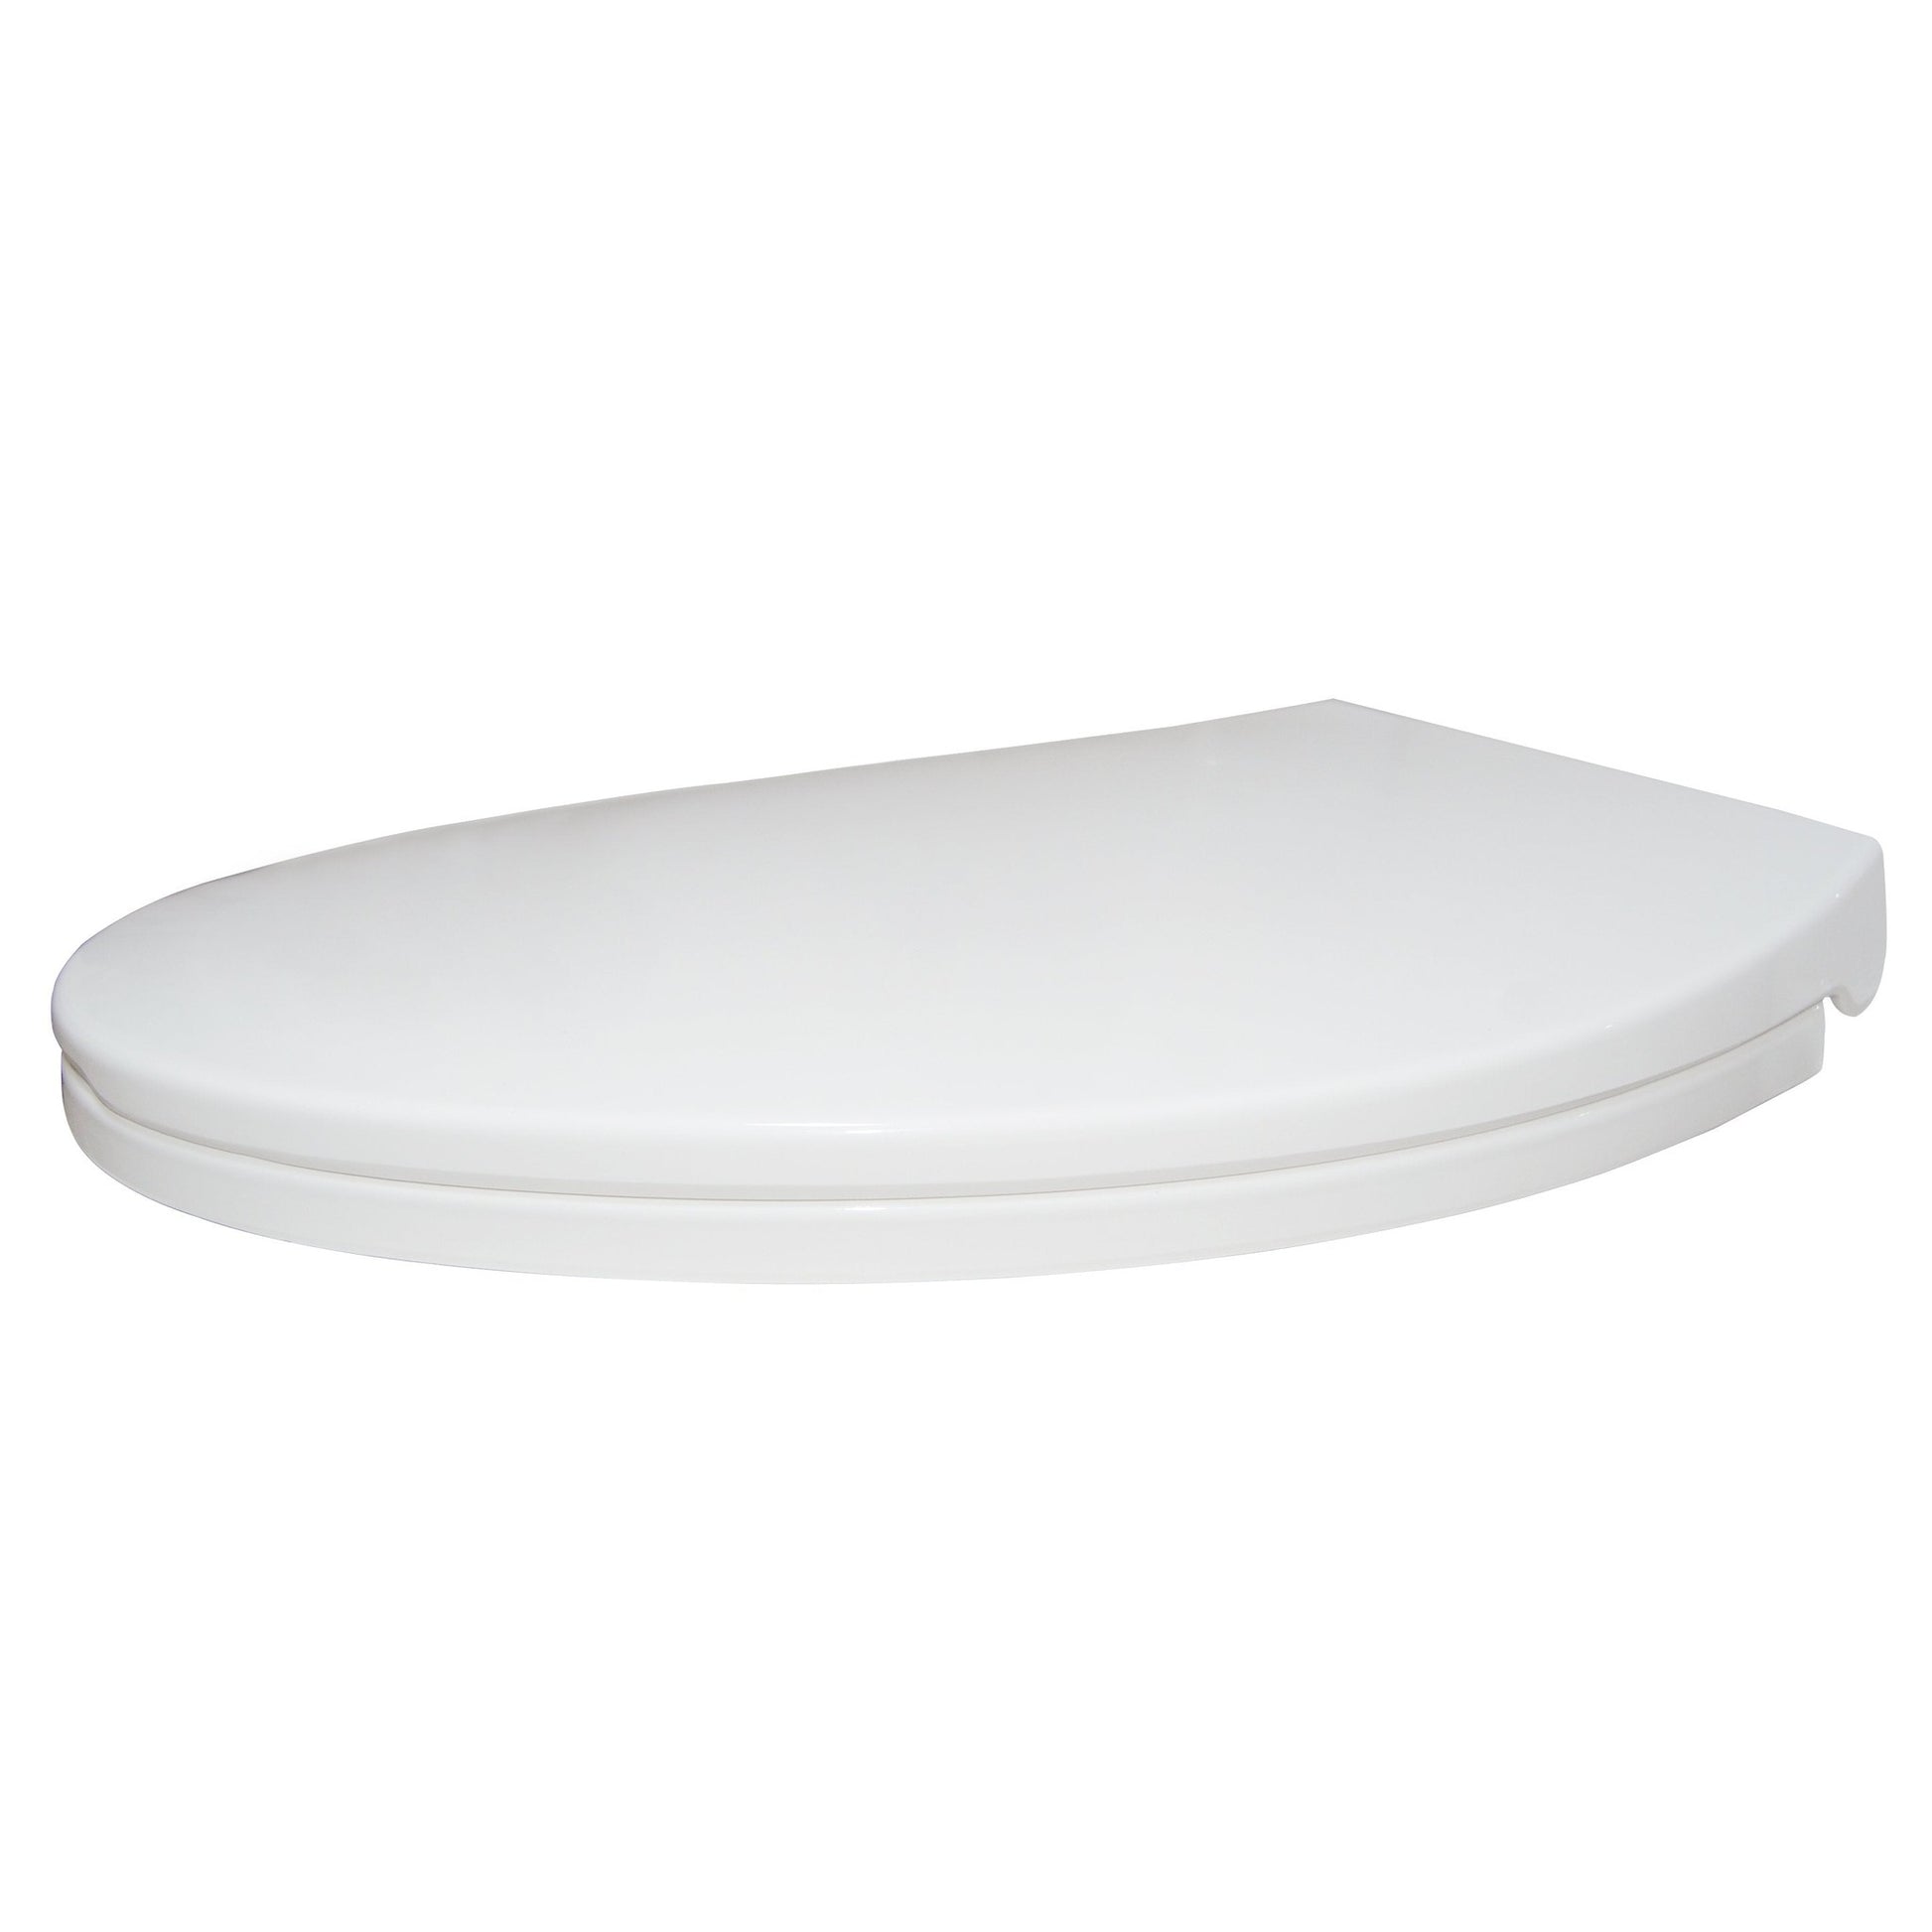 DeerValley DV-F068S11 Quick-Release Soft-Close Elongated White Plastic Polypropylene Toilet Seat (Fit with DV-1F52816/DV-1F52828/DV-1F52829 )